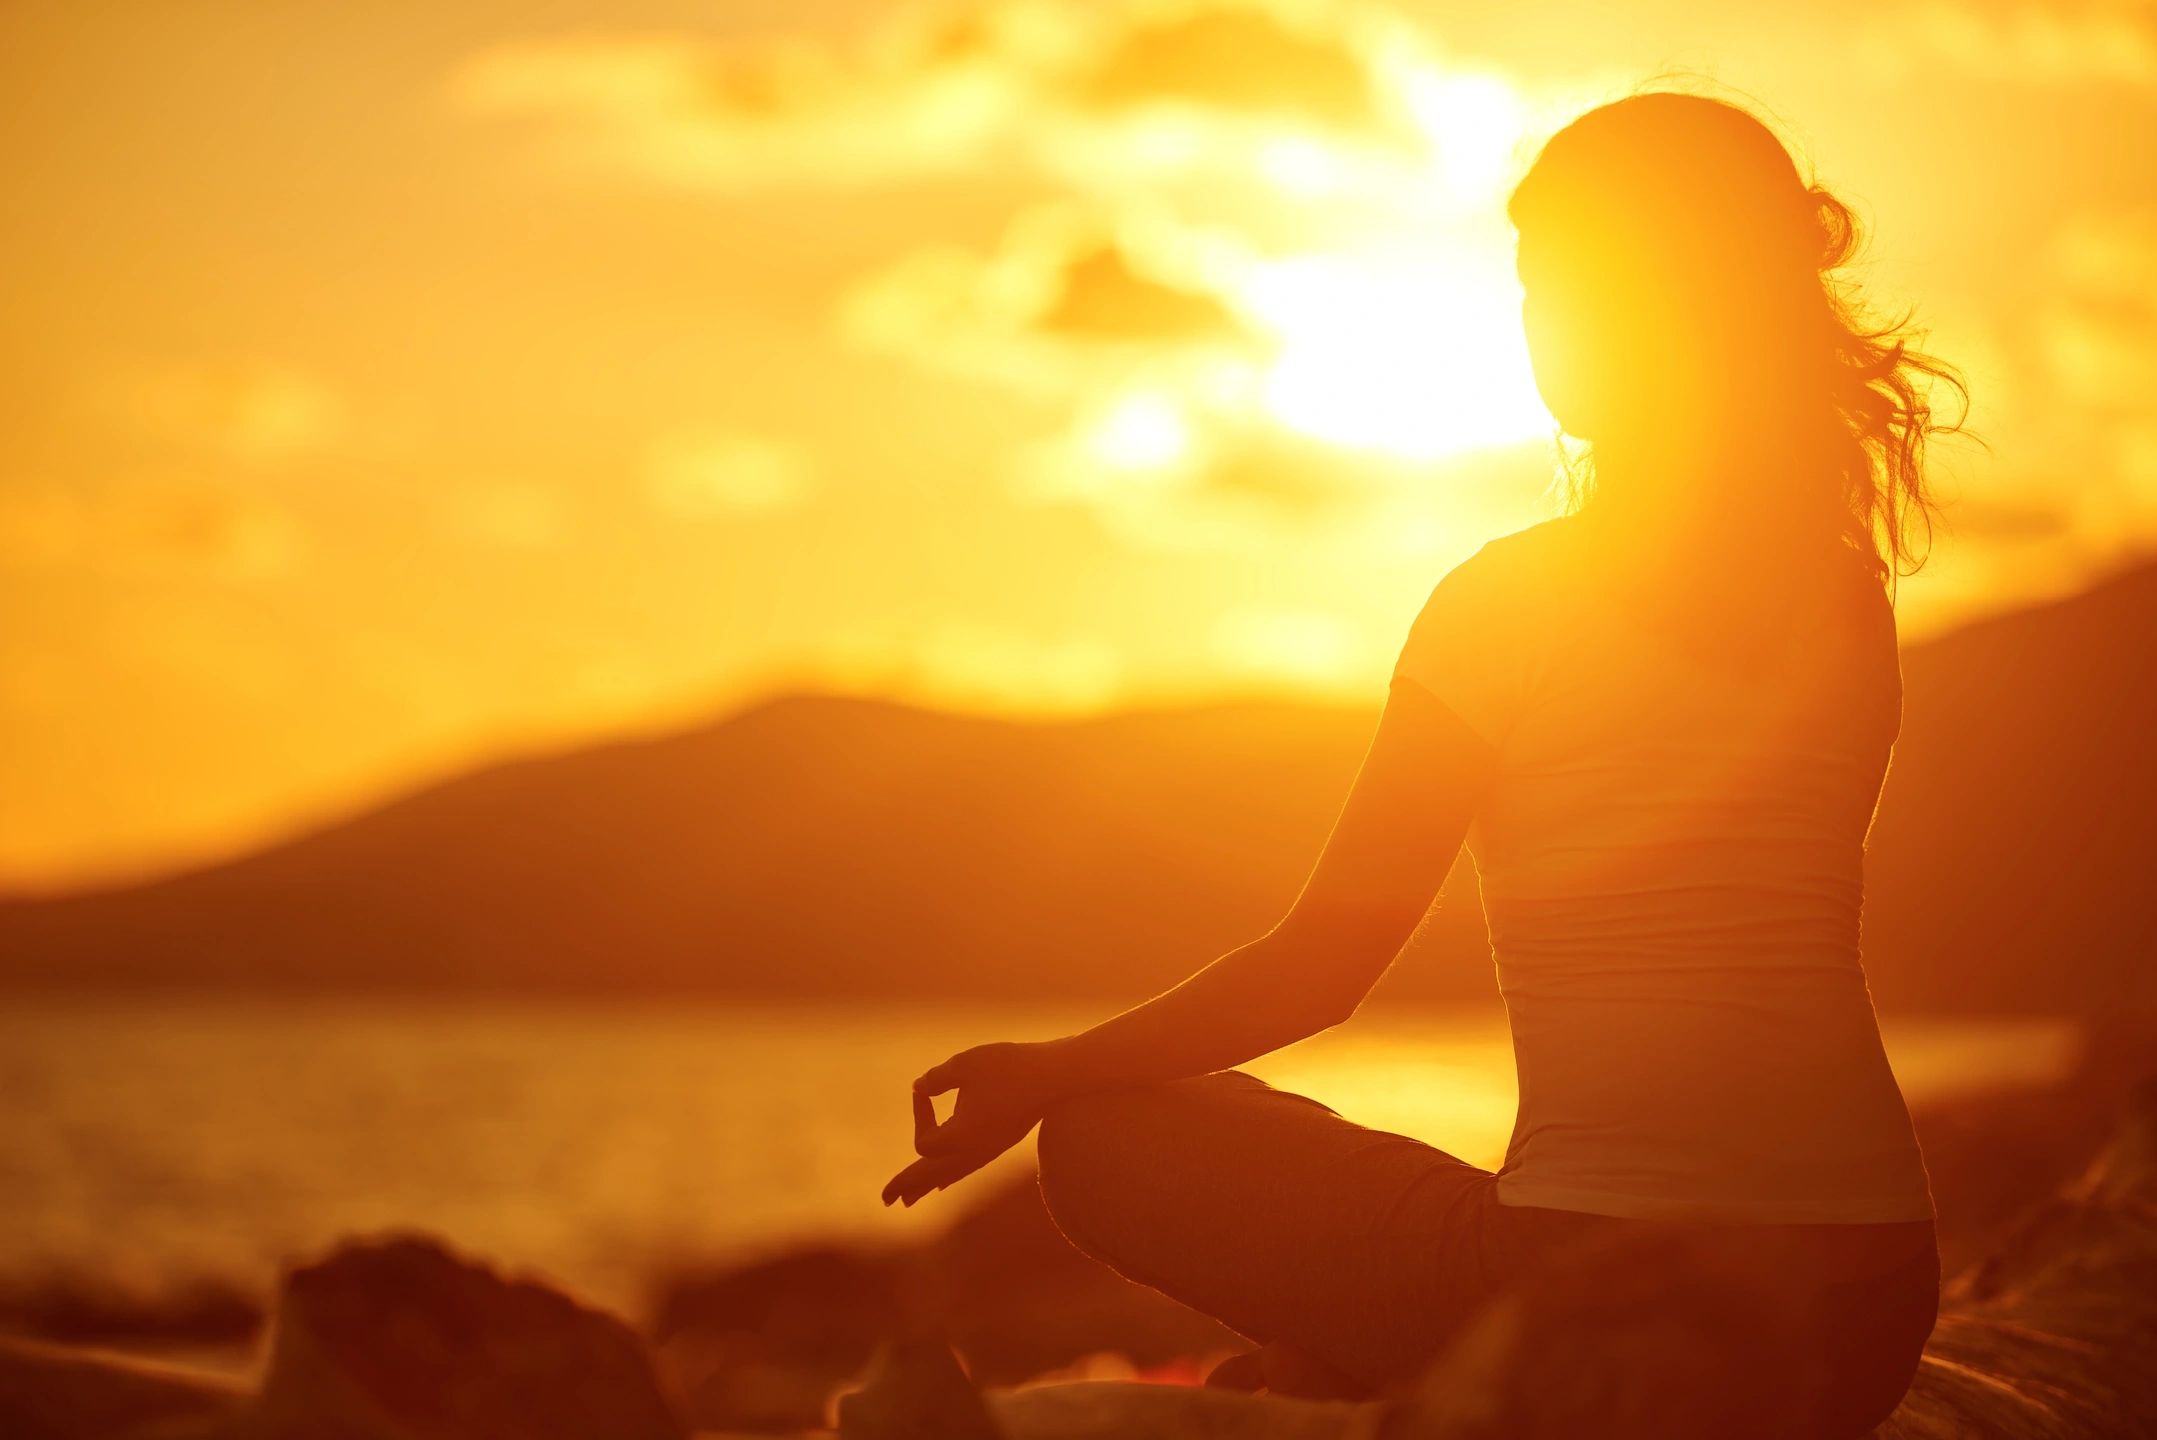 A person sits in a meditative pose by the water during sunset. The bright sunlight creates a glowing silhouette, highlighting their peaceful posture. This tranquil moment serves as a natural mental health treatment against the backdrop of blurred mountains and a serene, golden sky.